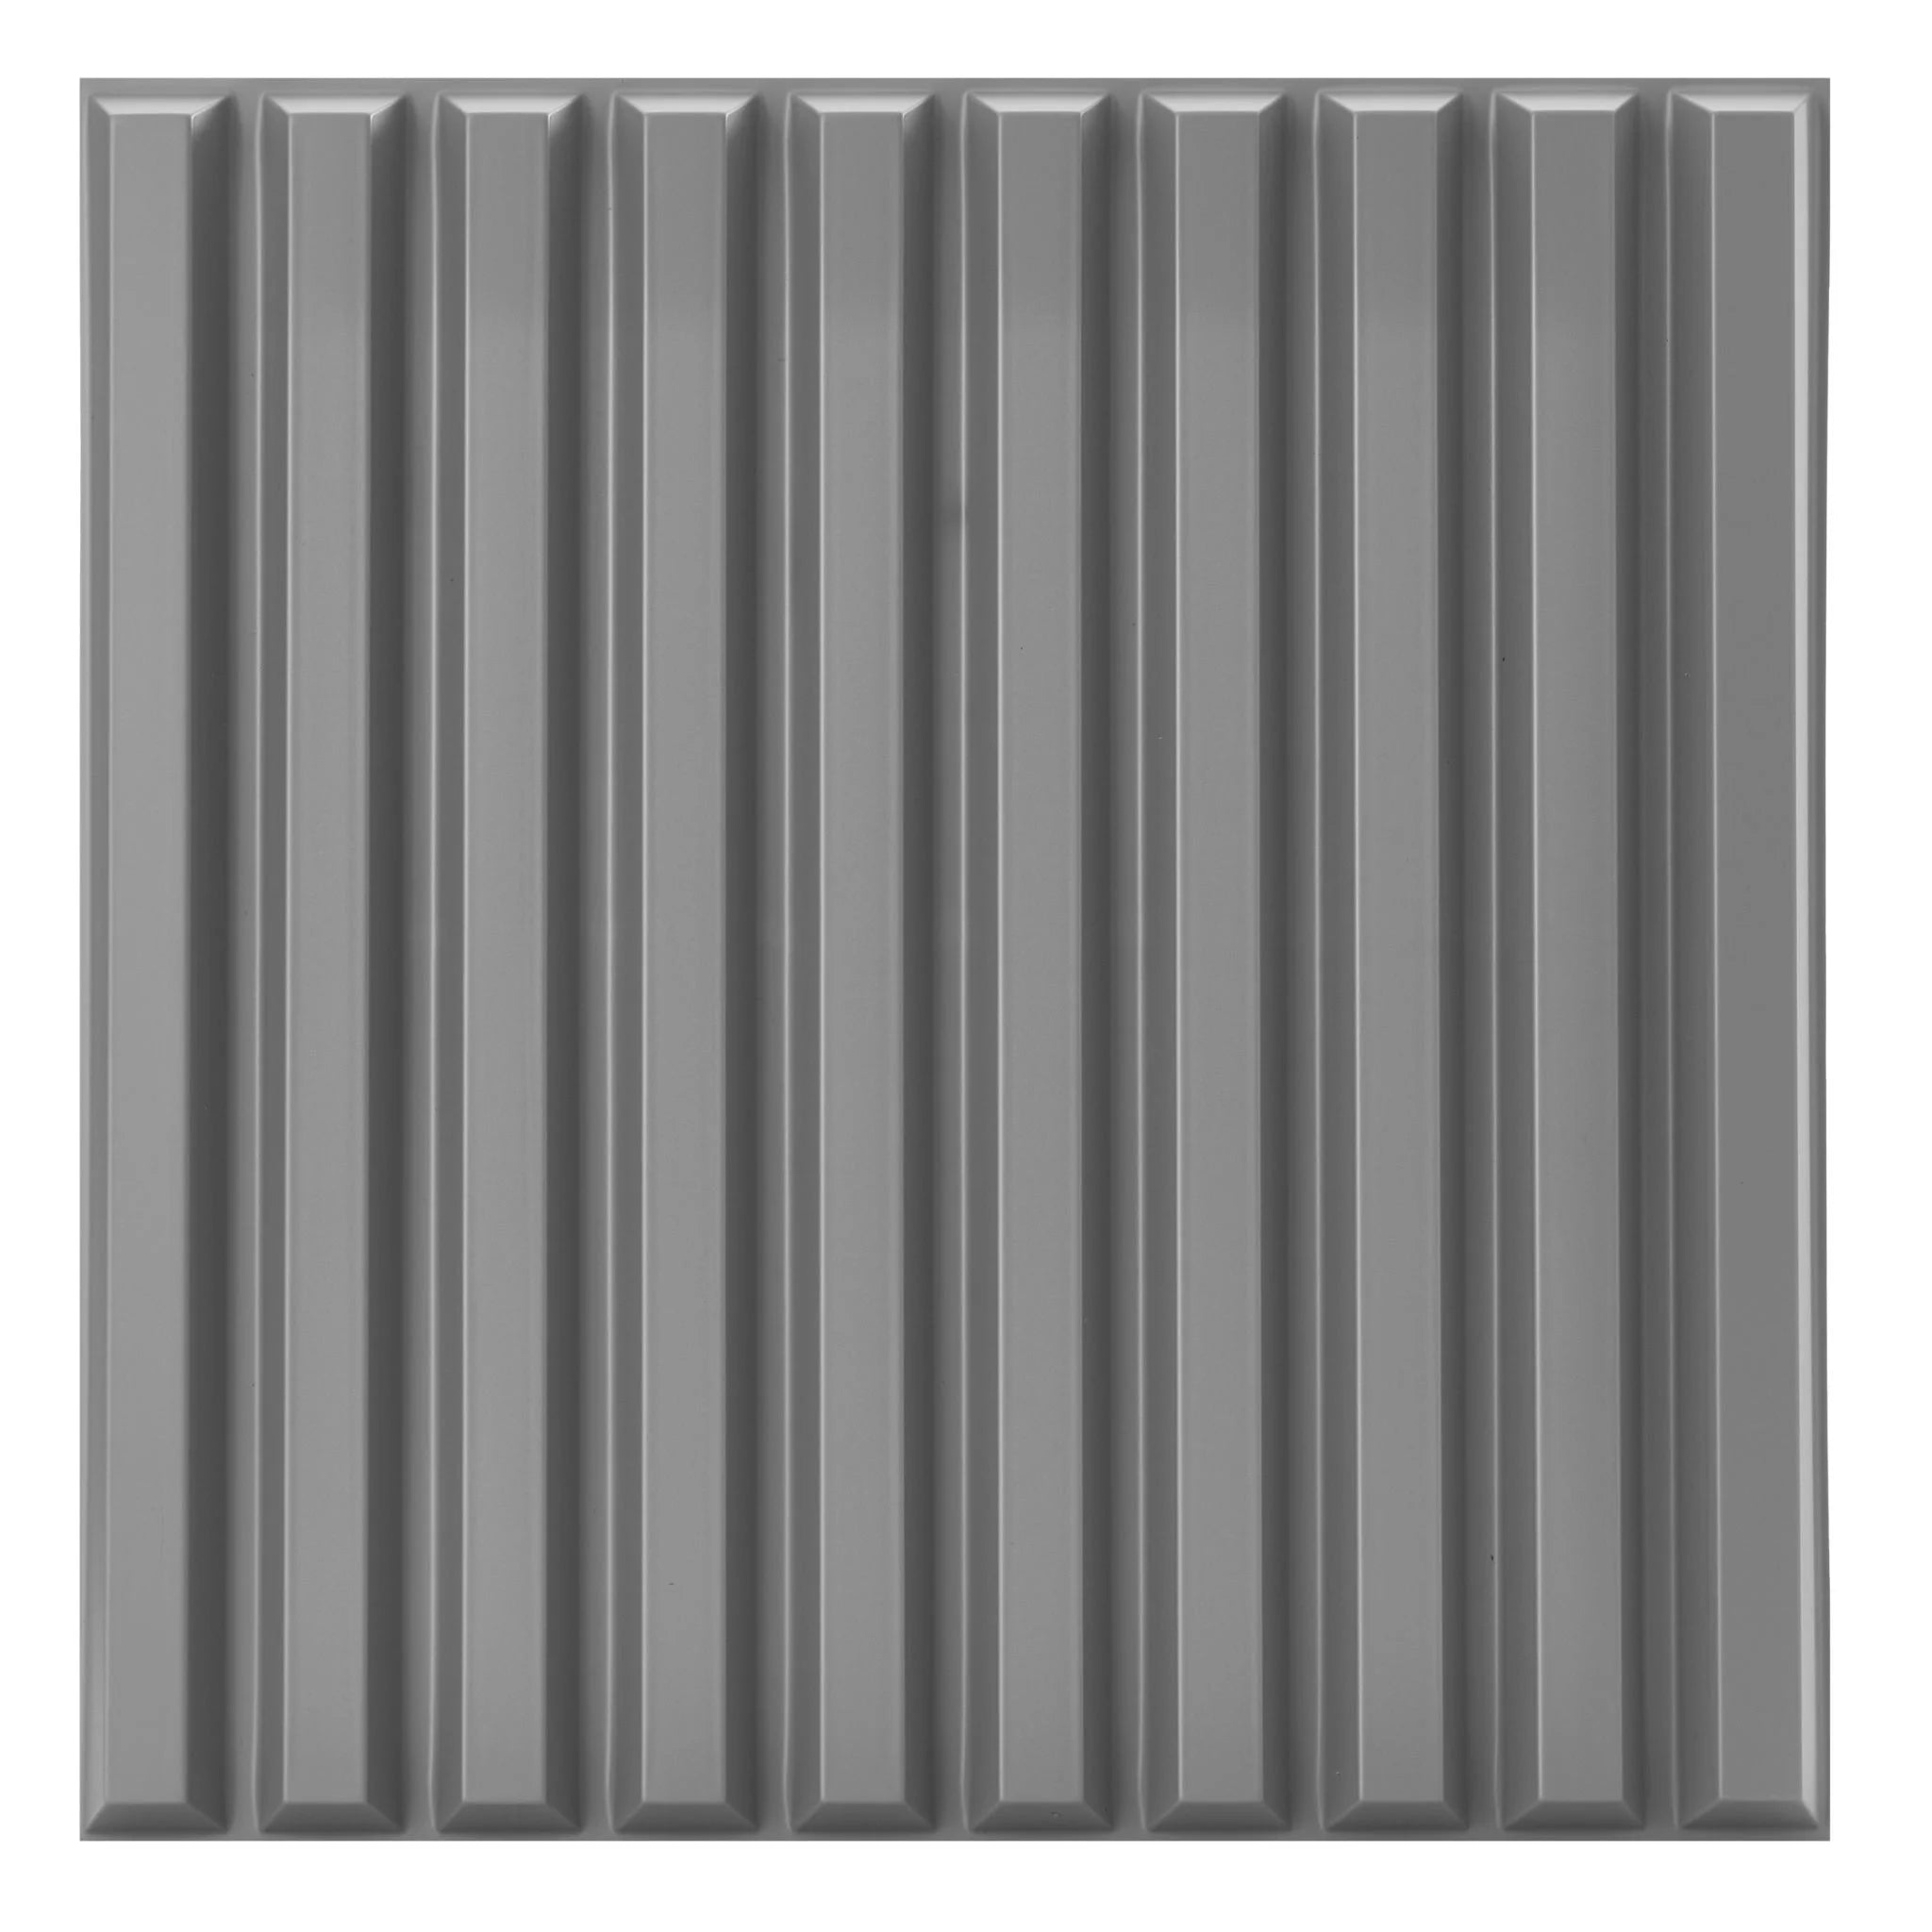 Grey PVC wall panel with vertical ribbed design